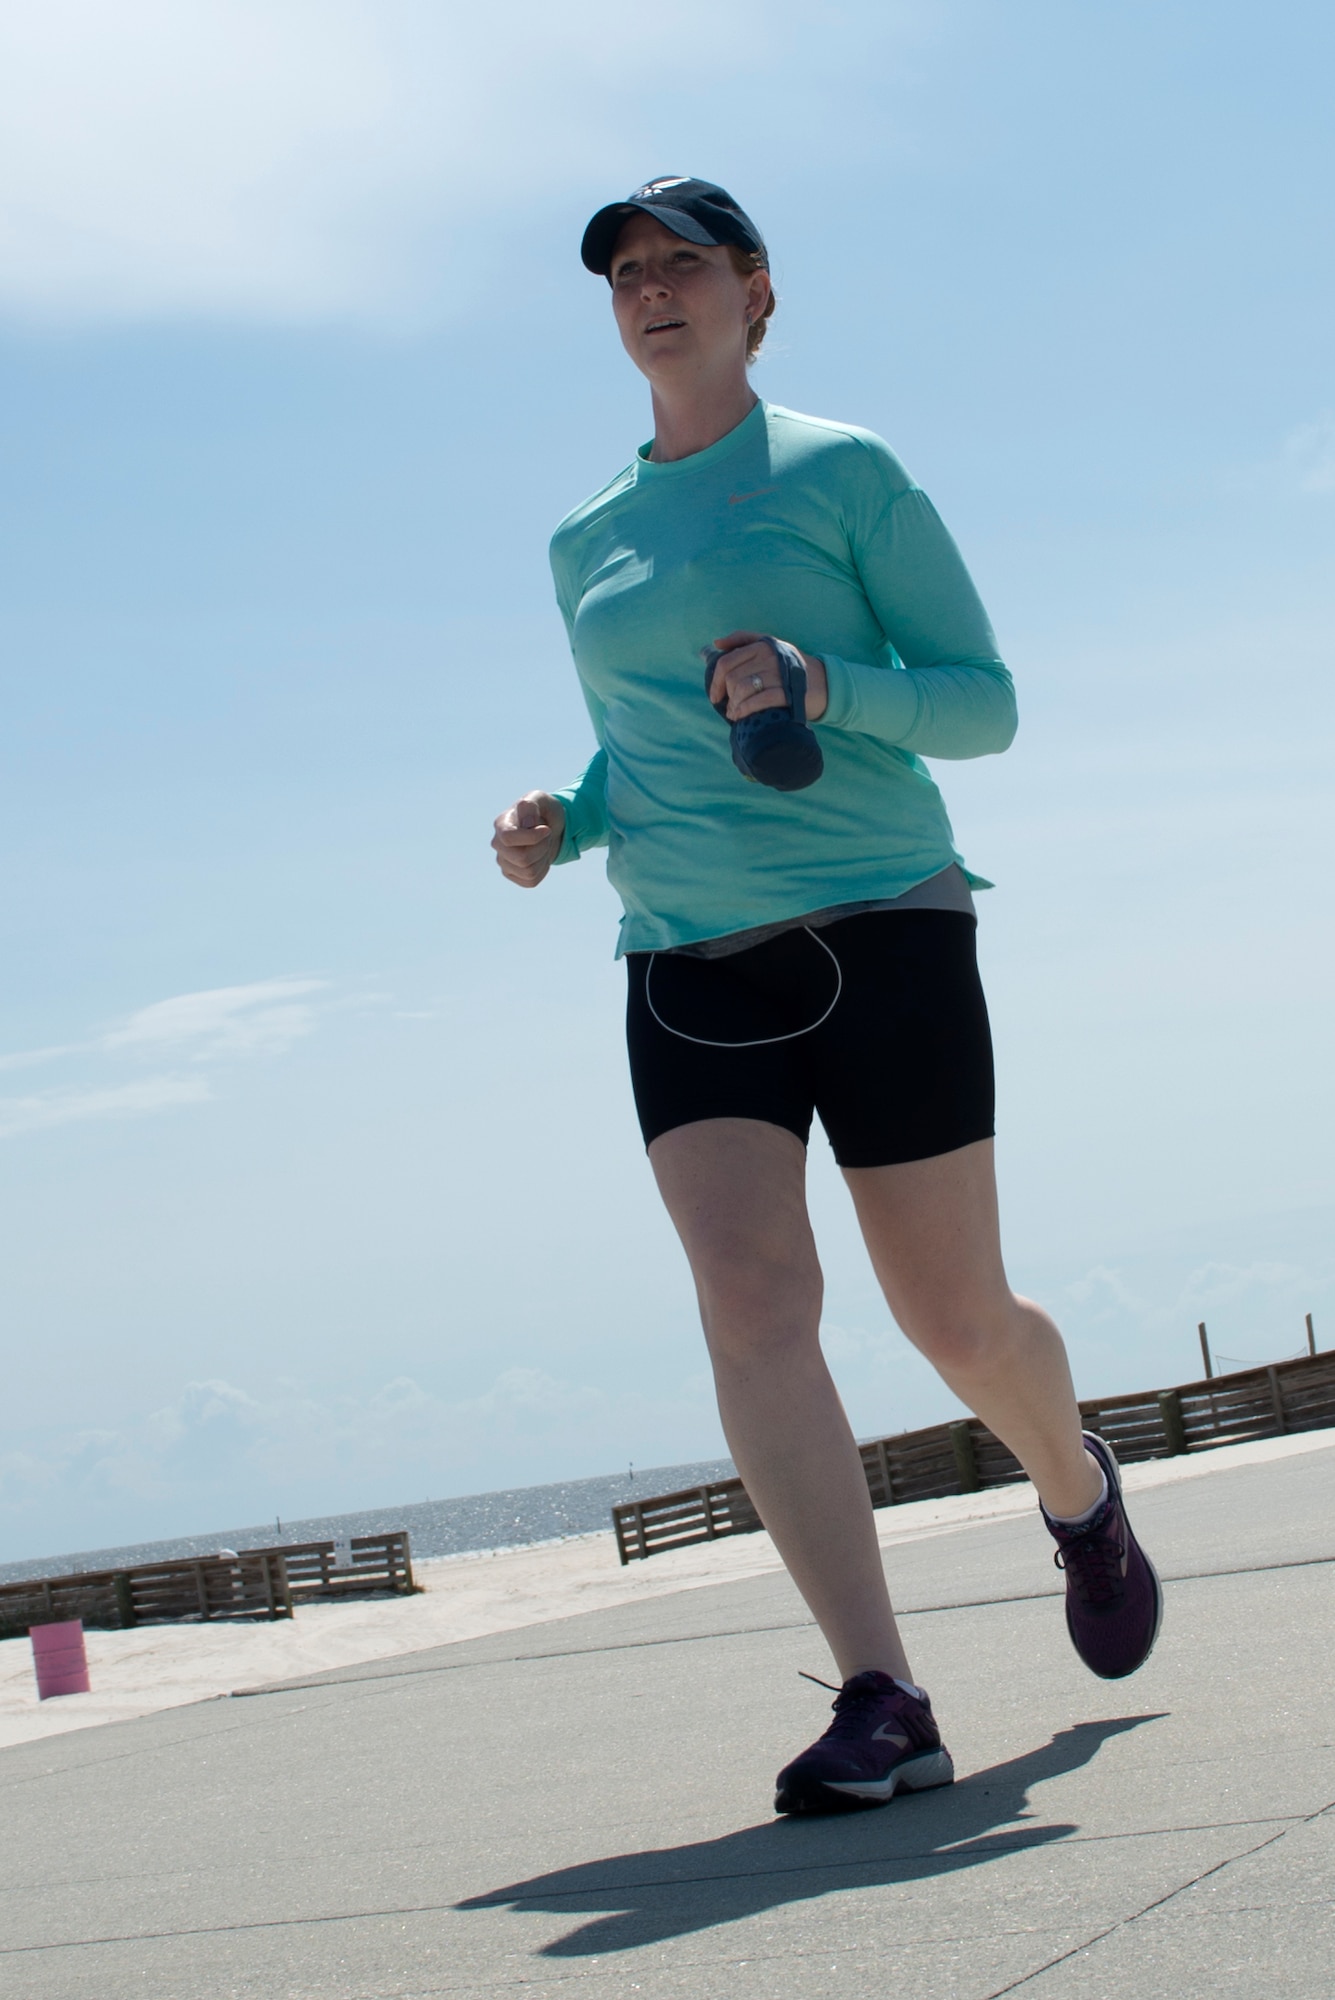 U.S. Air Force Capt. Kelly Hiser, 335th Training Squadron force support officer, runs during the Crawfish Relay at Biloxi, Mississippi, May 3, 2019. The relay team, "Unicorn of the Sea," accepted the challenge of the Crawfish Relay to not only push themselves, but to honor two special tactics Airmen killed in action, U.S. Air Force Master Sgt. John Chapman and U.S. Air Force Staff Sgt. Dylan Elchin. (U.S. Air Force photo by Airman Seth Haddix)